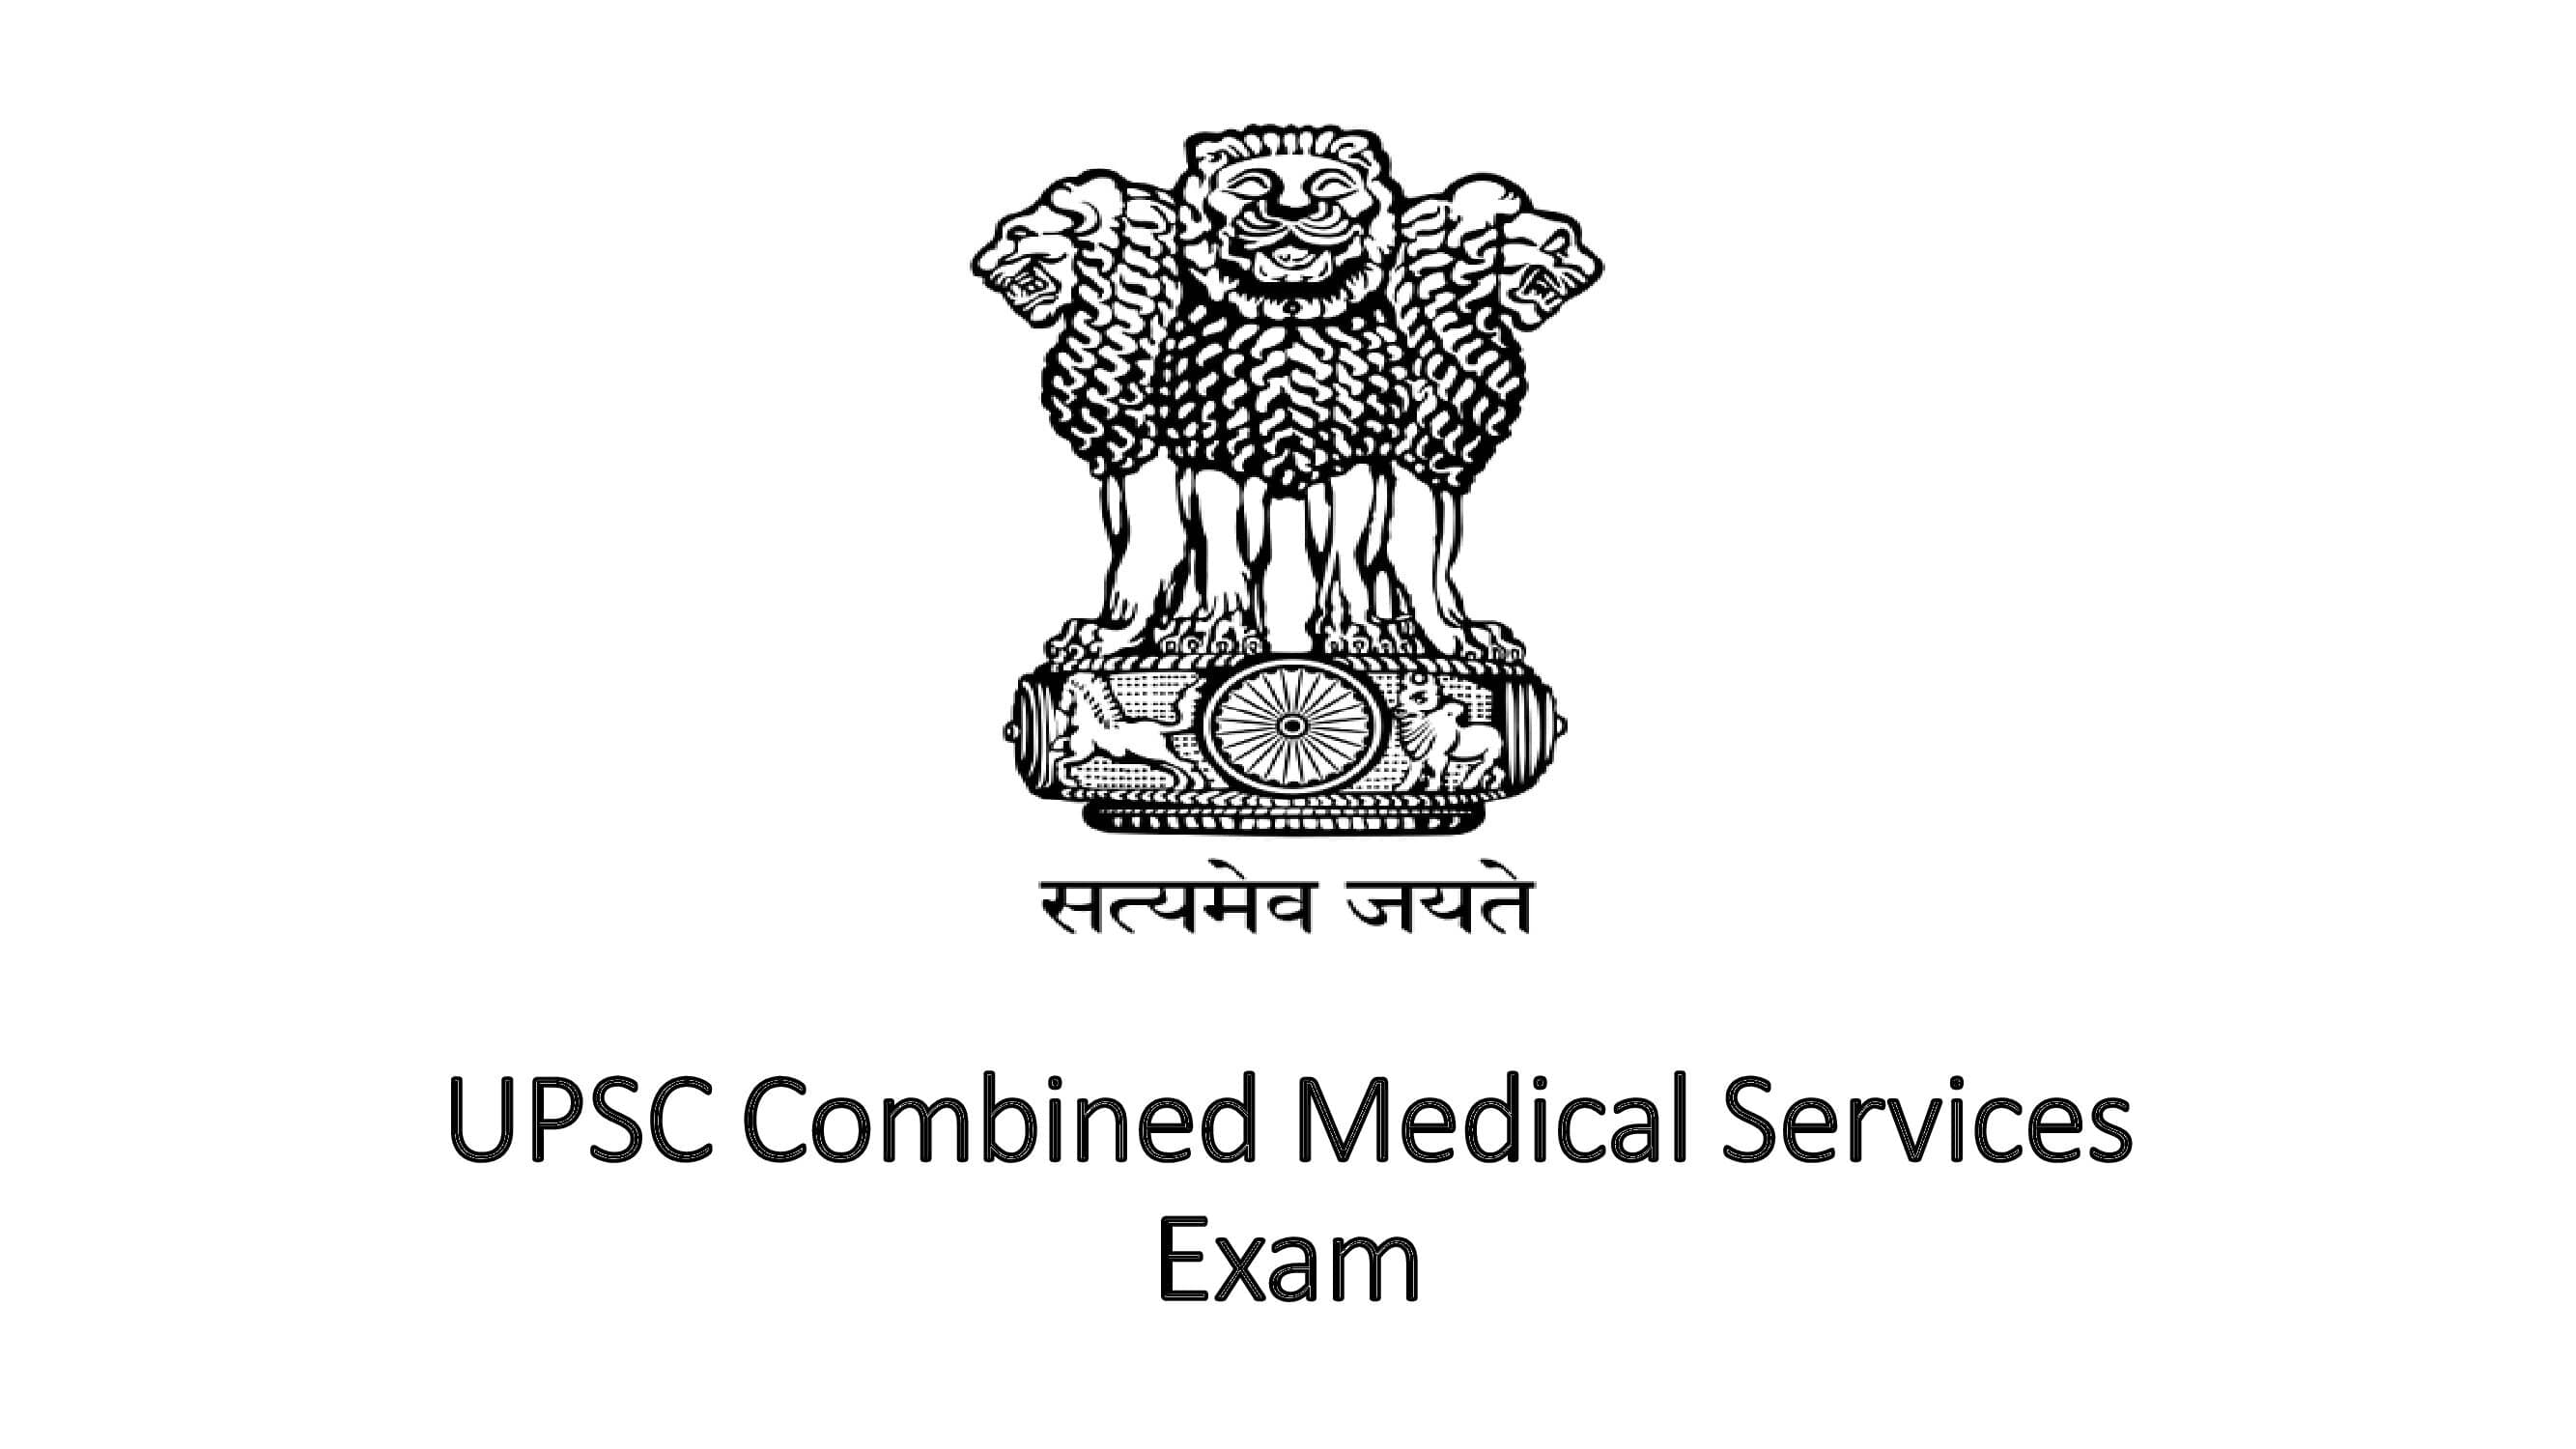 UPSC Combined Medical Services Exam